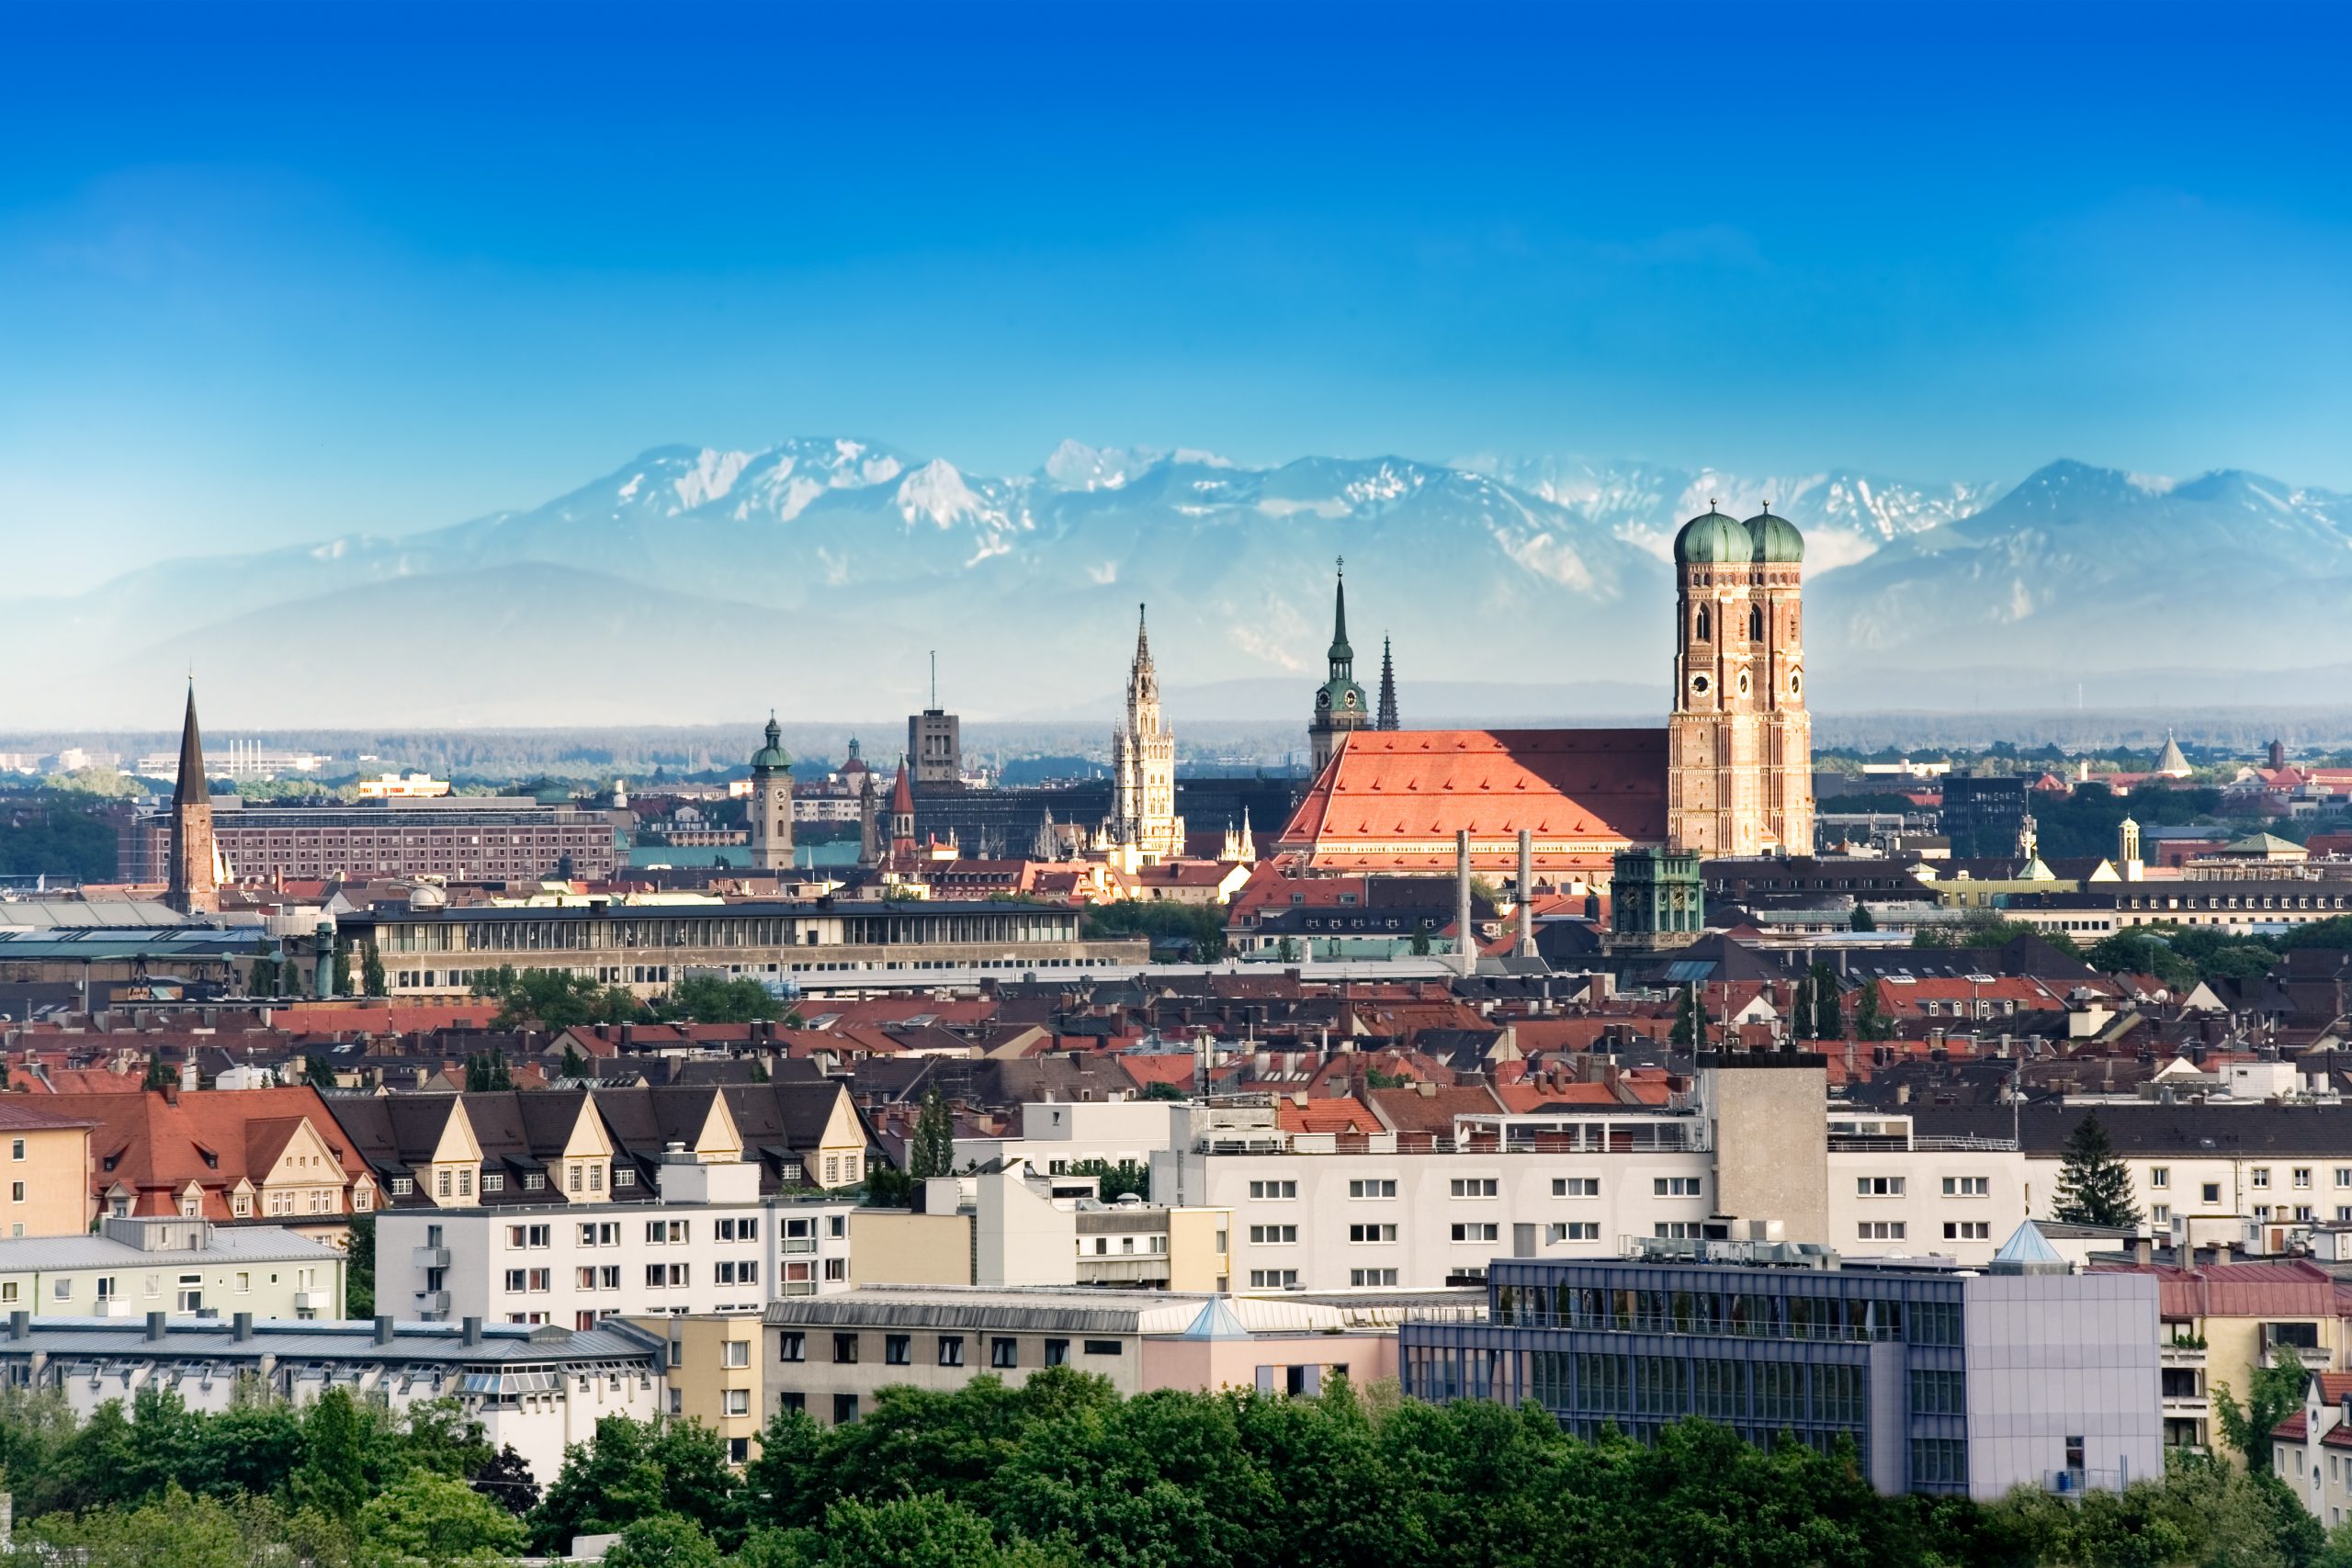 the Munich skyline with mountains in the background